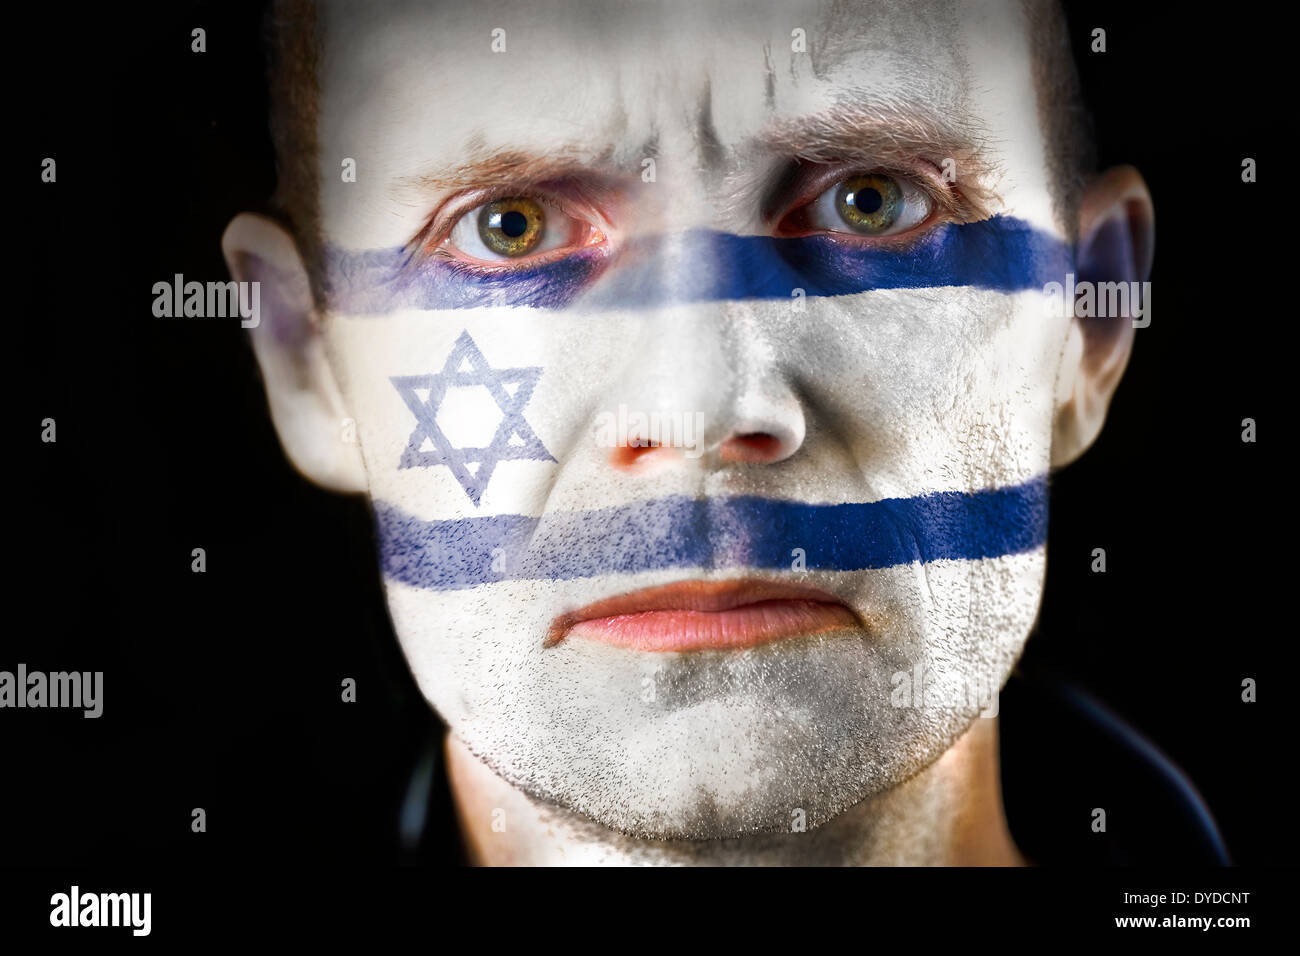 An intense stare from a man with their face painted with the Israel flag. Stock Photo